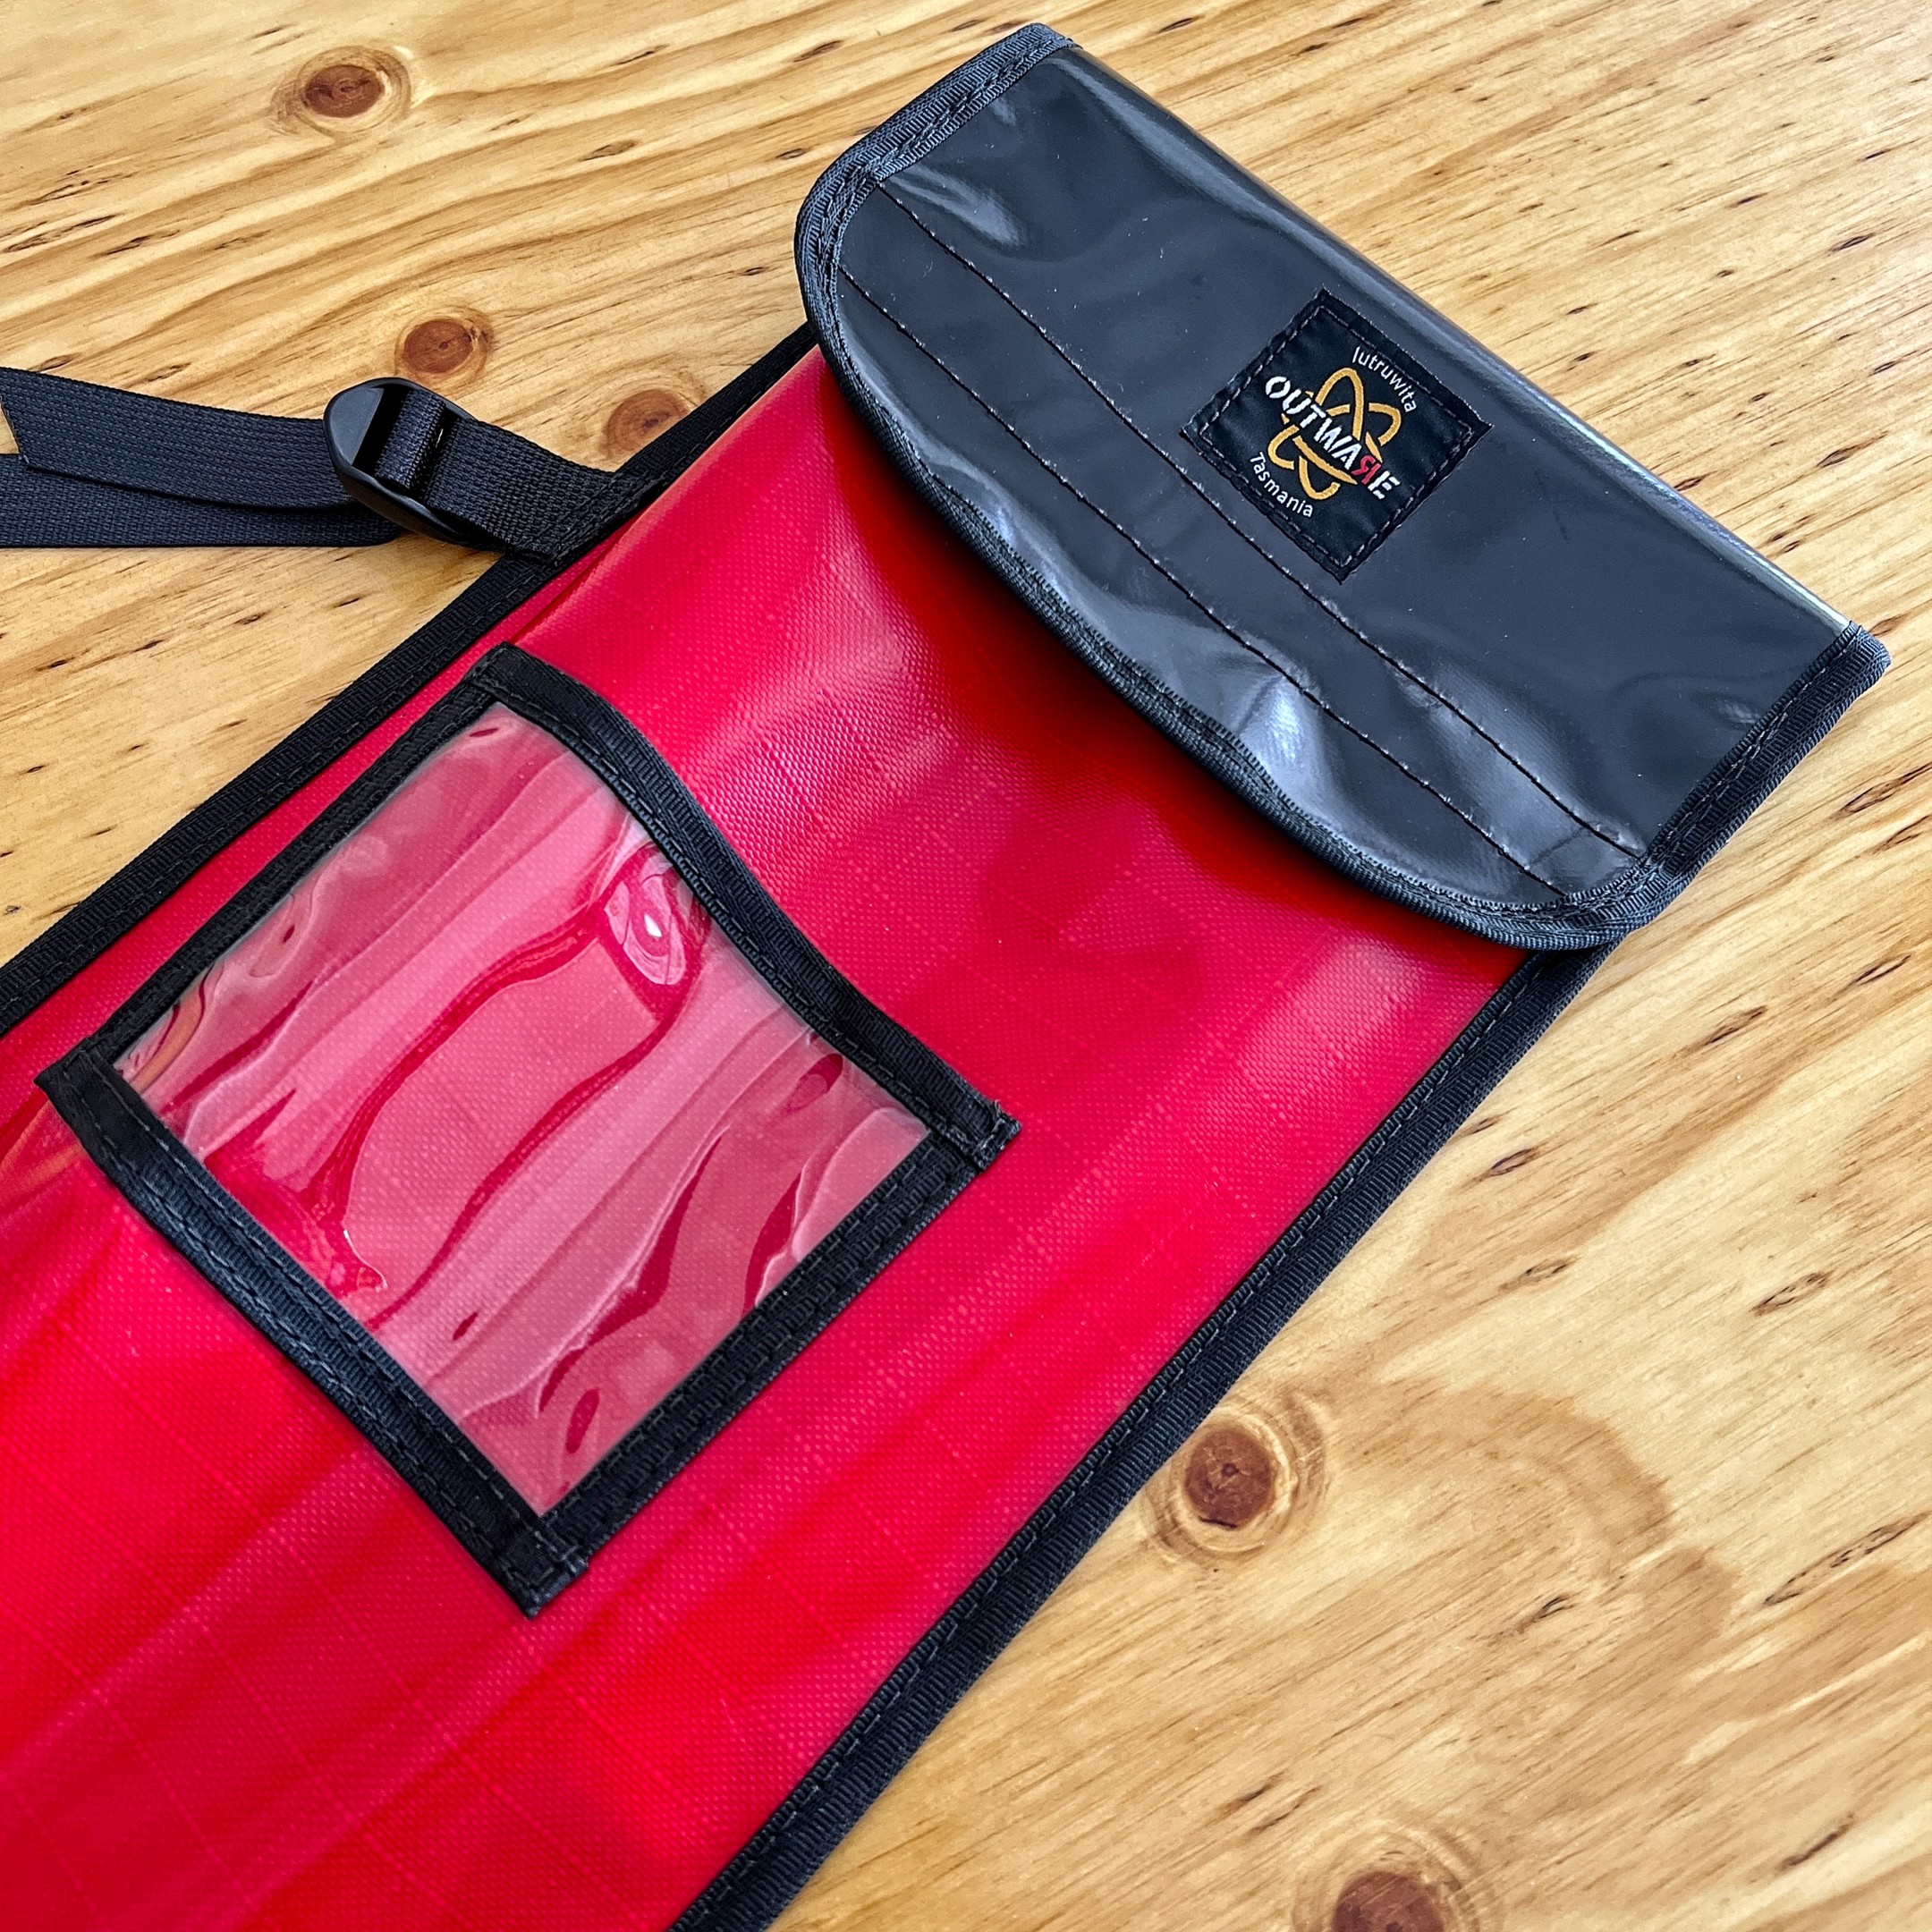 Starboard 3 Piece SUP Paddle Bag